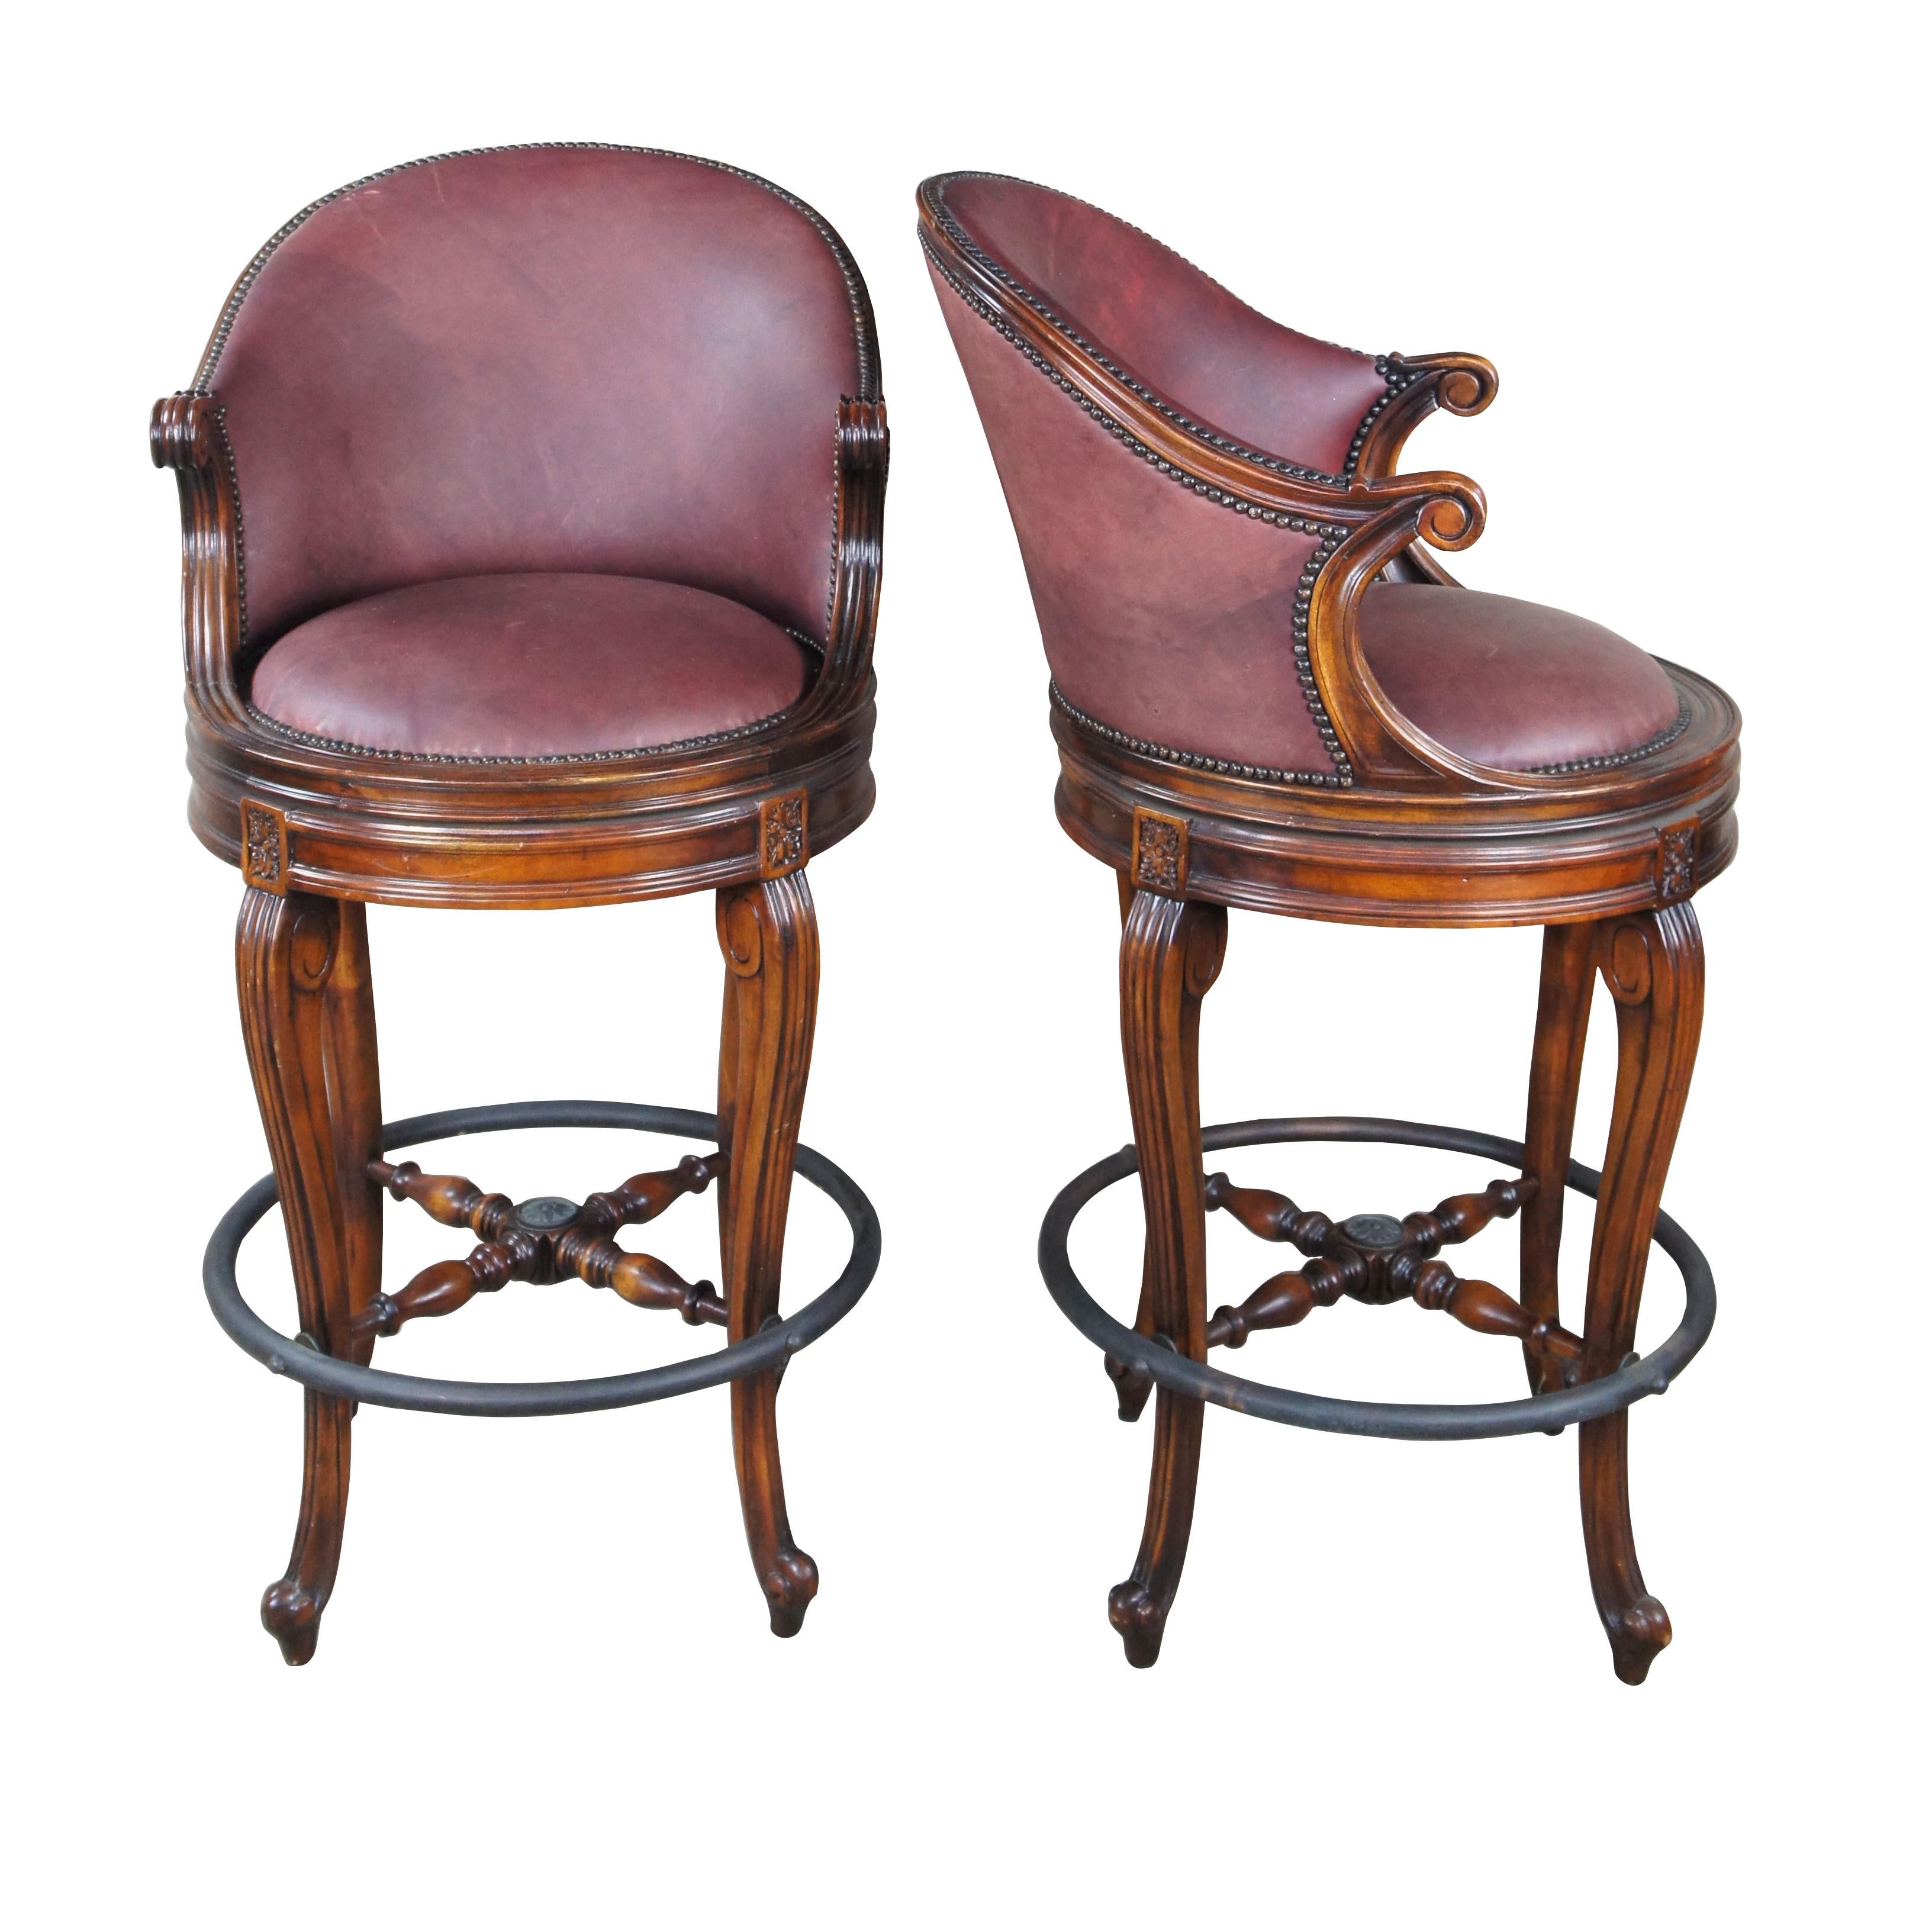 Set of 3 An Evening At Ease by Theodore Alexander.  Inspired by Napoleon III and Louis XV styling.  Features a hand carved mahogany scoop back, a padded red leather upholstered seat, with scroll arms and cabriole legs with a verdigris brass foot